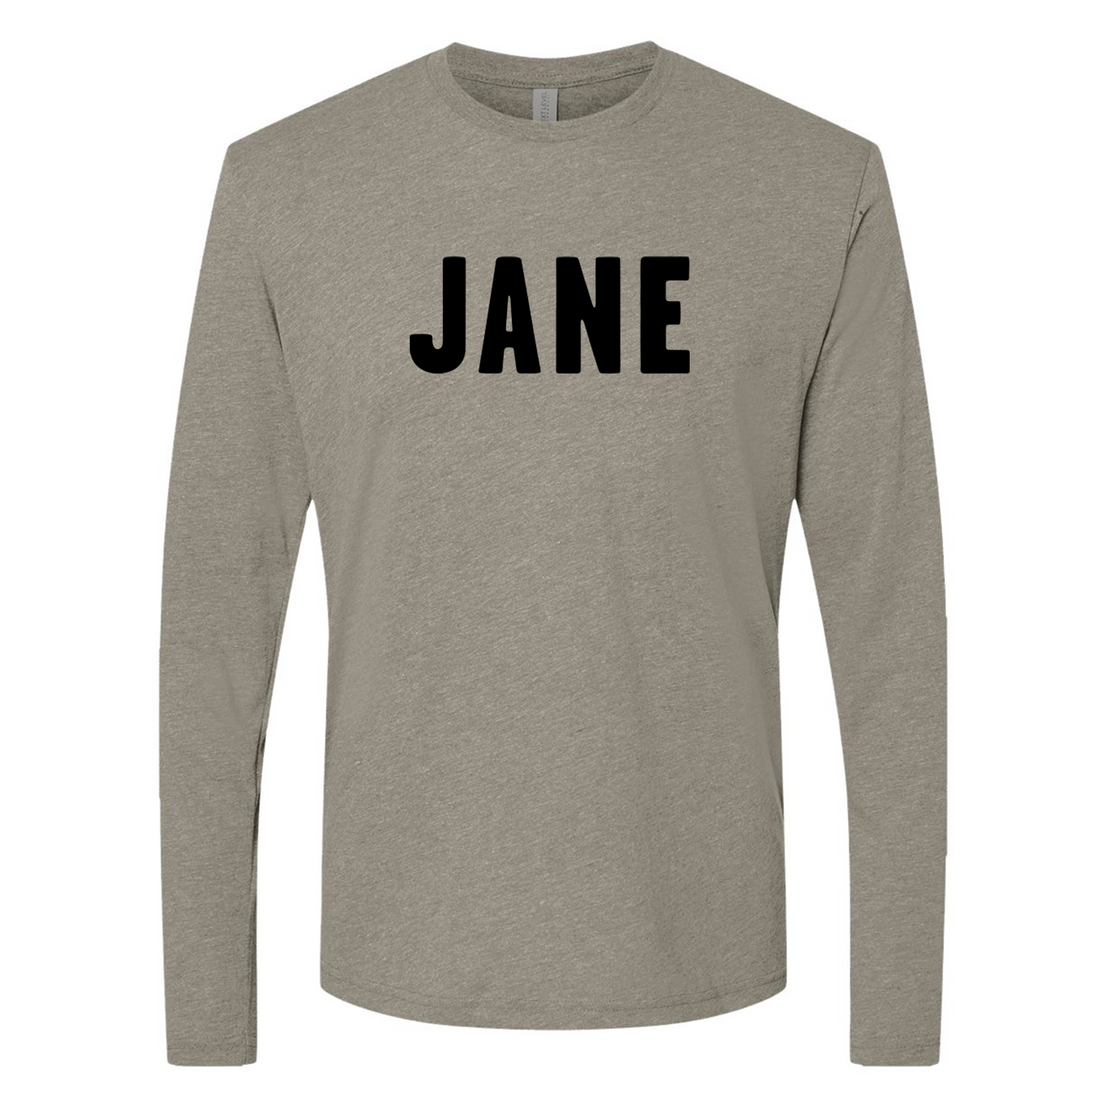 Unisex JANE Long Sleeve T-Shirt in Grey with Black Letters